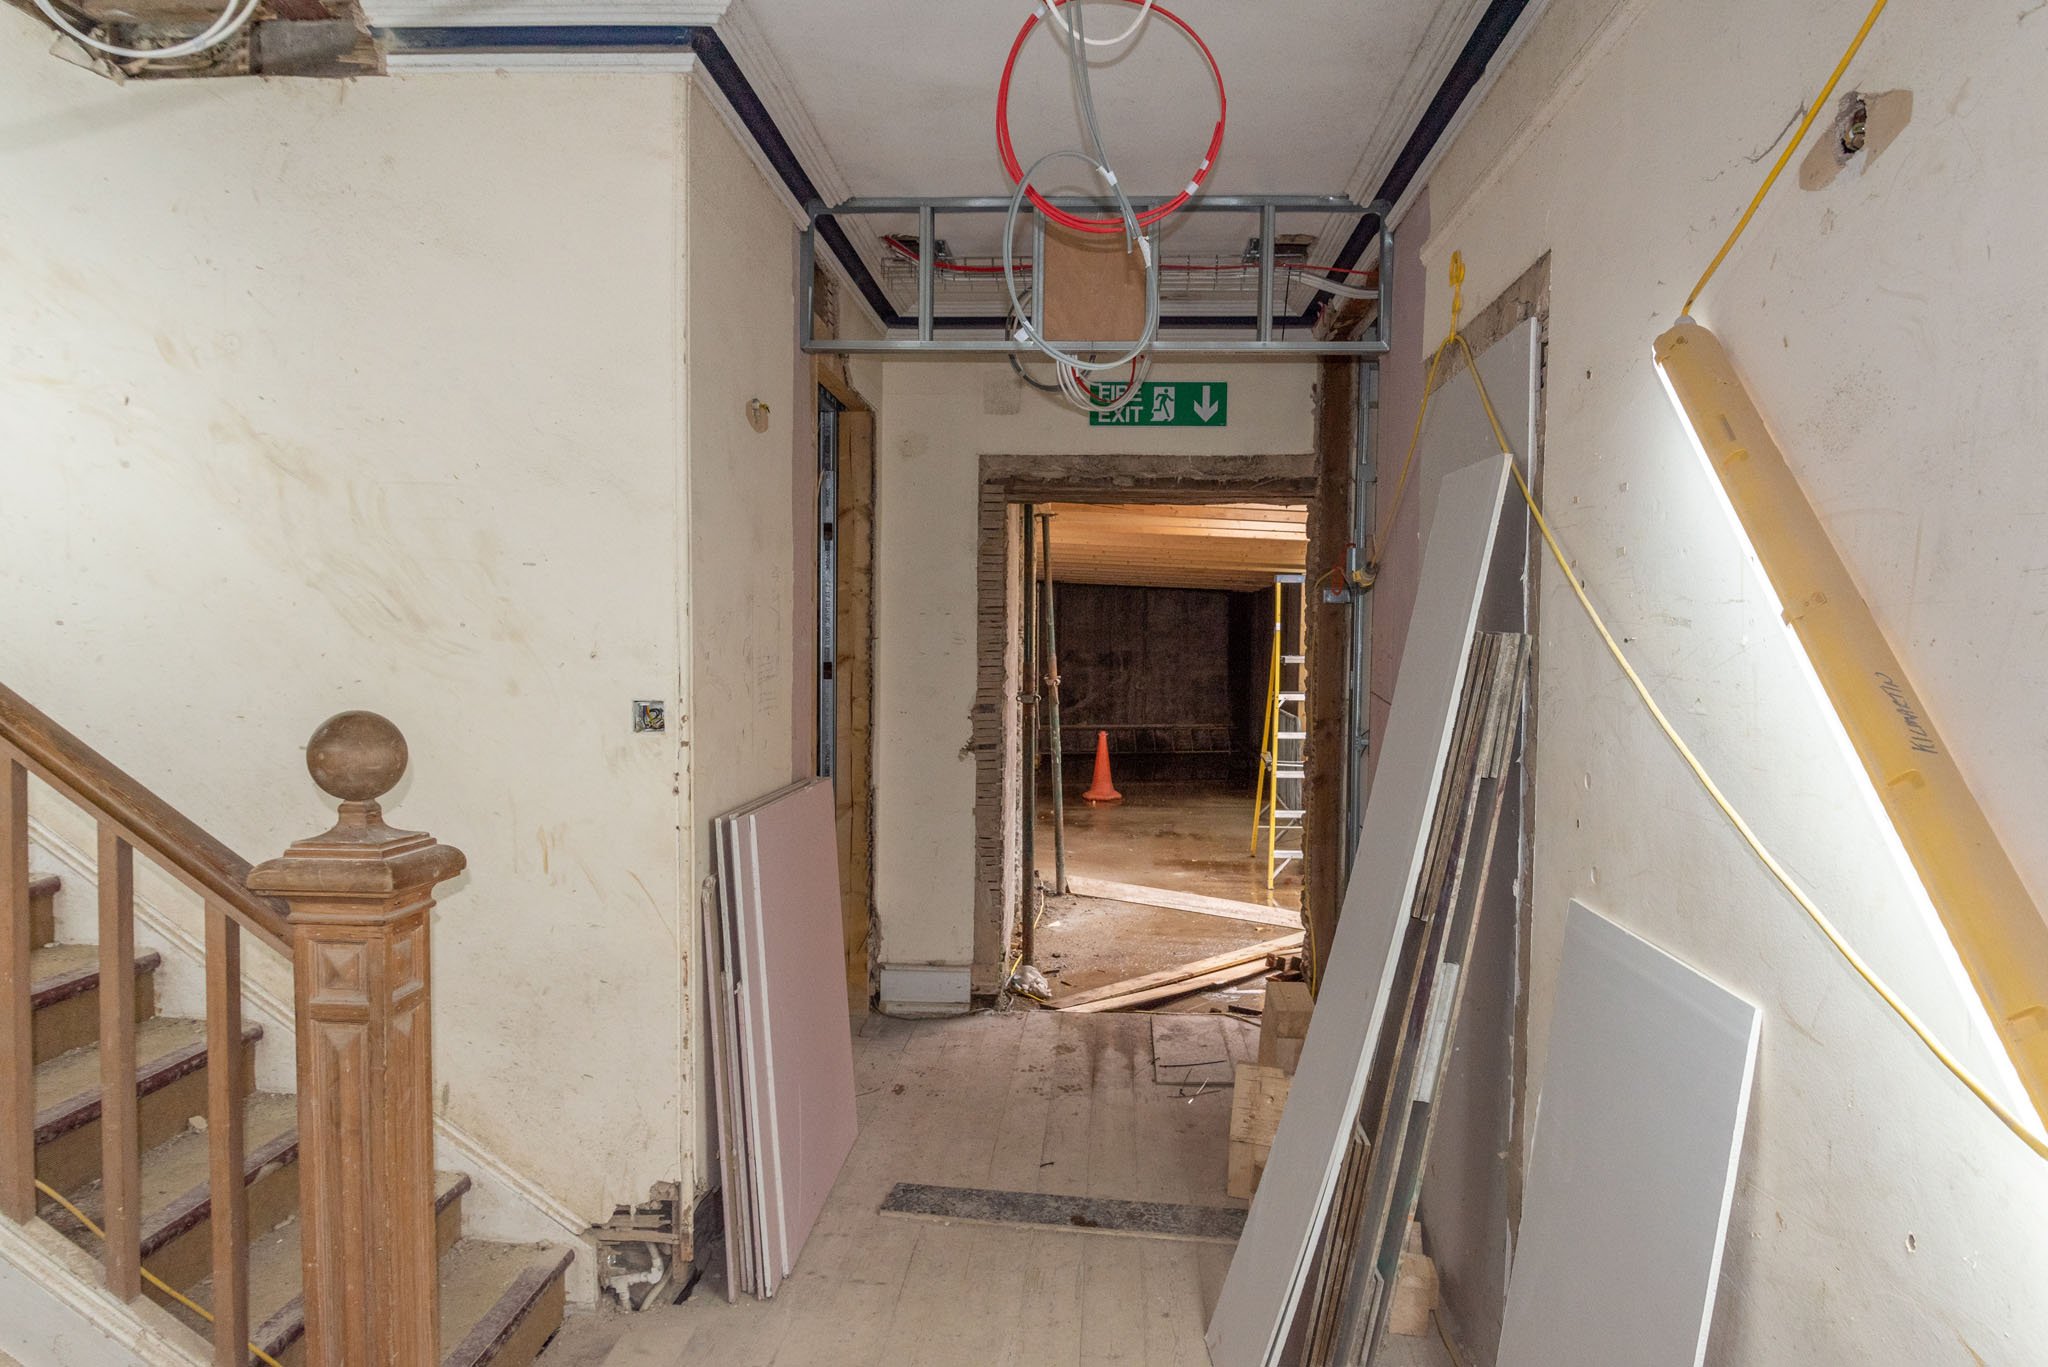  Looking along the corridor which will connect the Exhibition Spaces and Reception. 